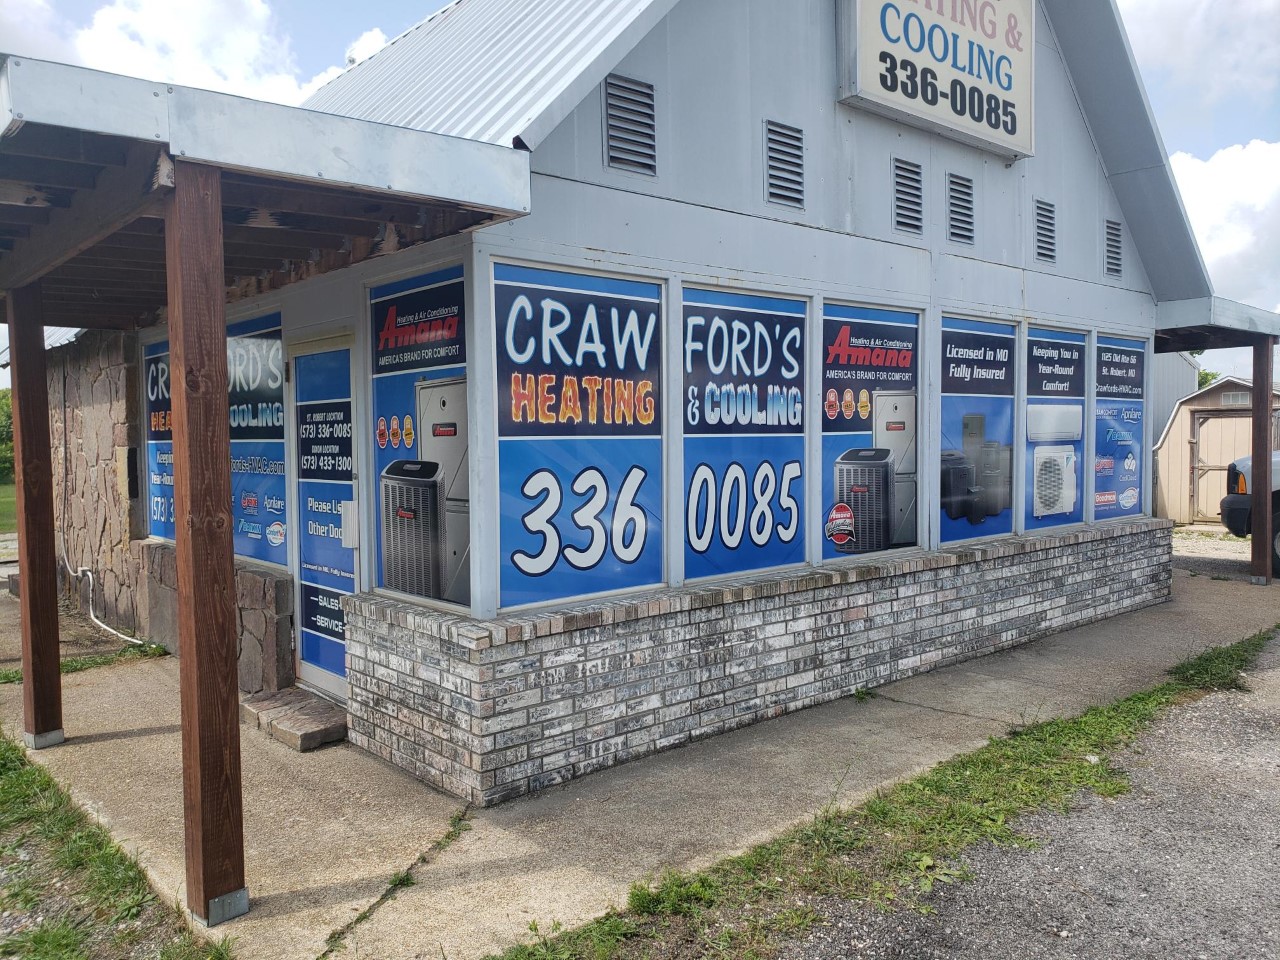 Crawfords Heating And Cooling Vinyl Wrapping Store Fronts Windows Outdoor Pro Dezigns Jefferson City Missouri